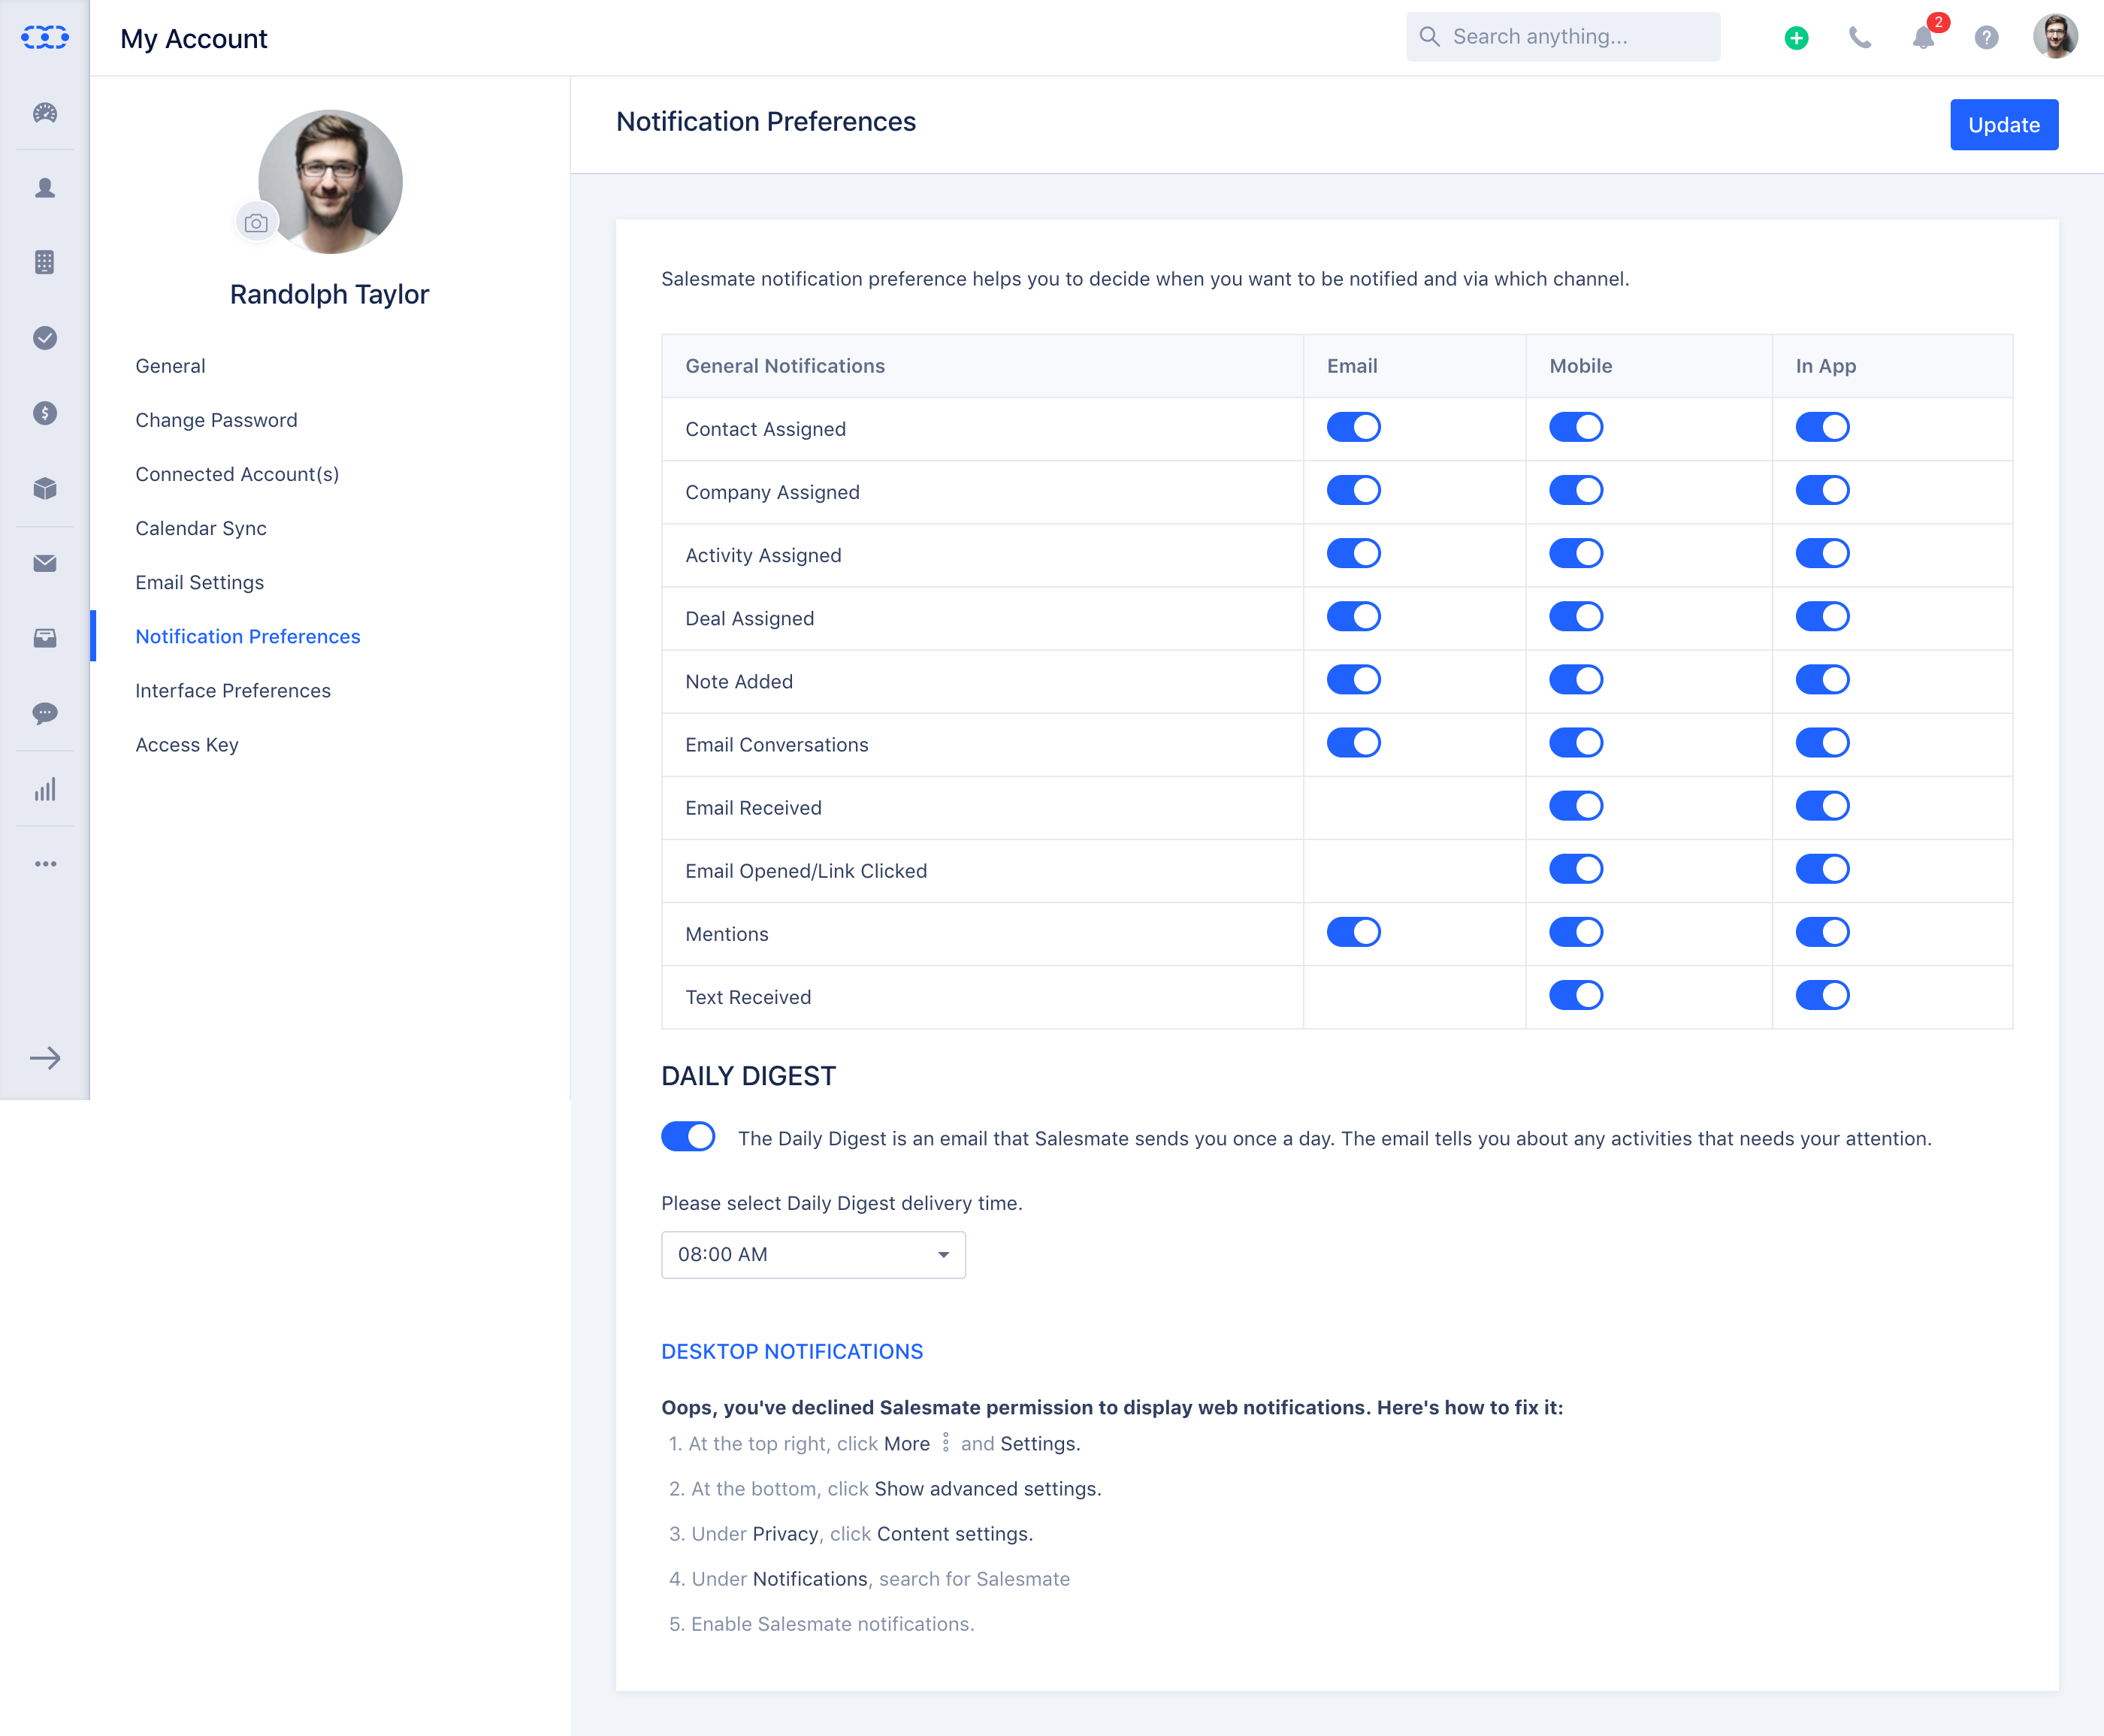 screencapture-staging4-salesmate-io-2019-07-05-04_58_23.png